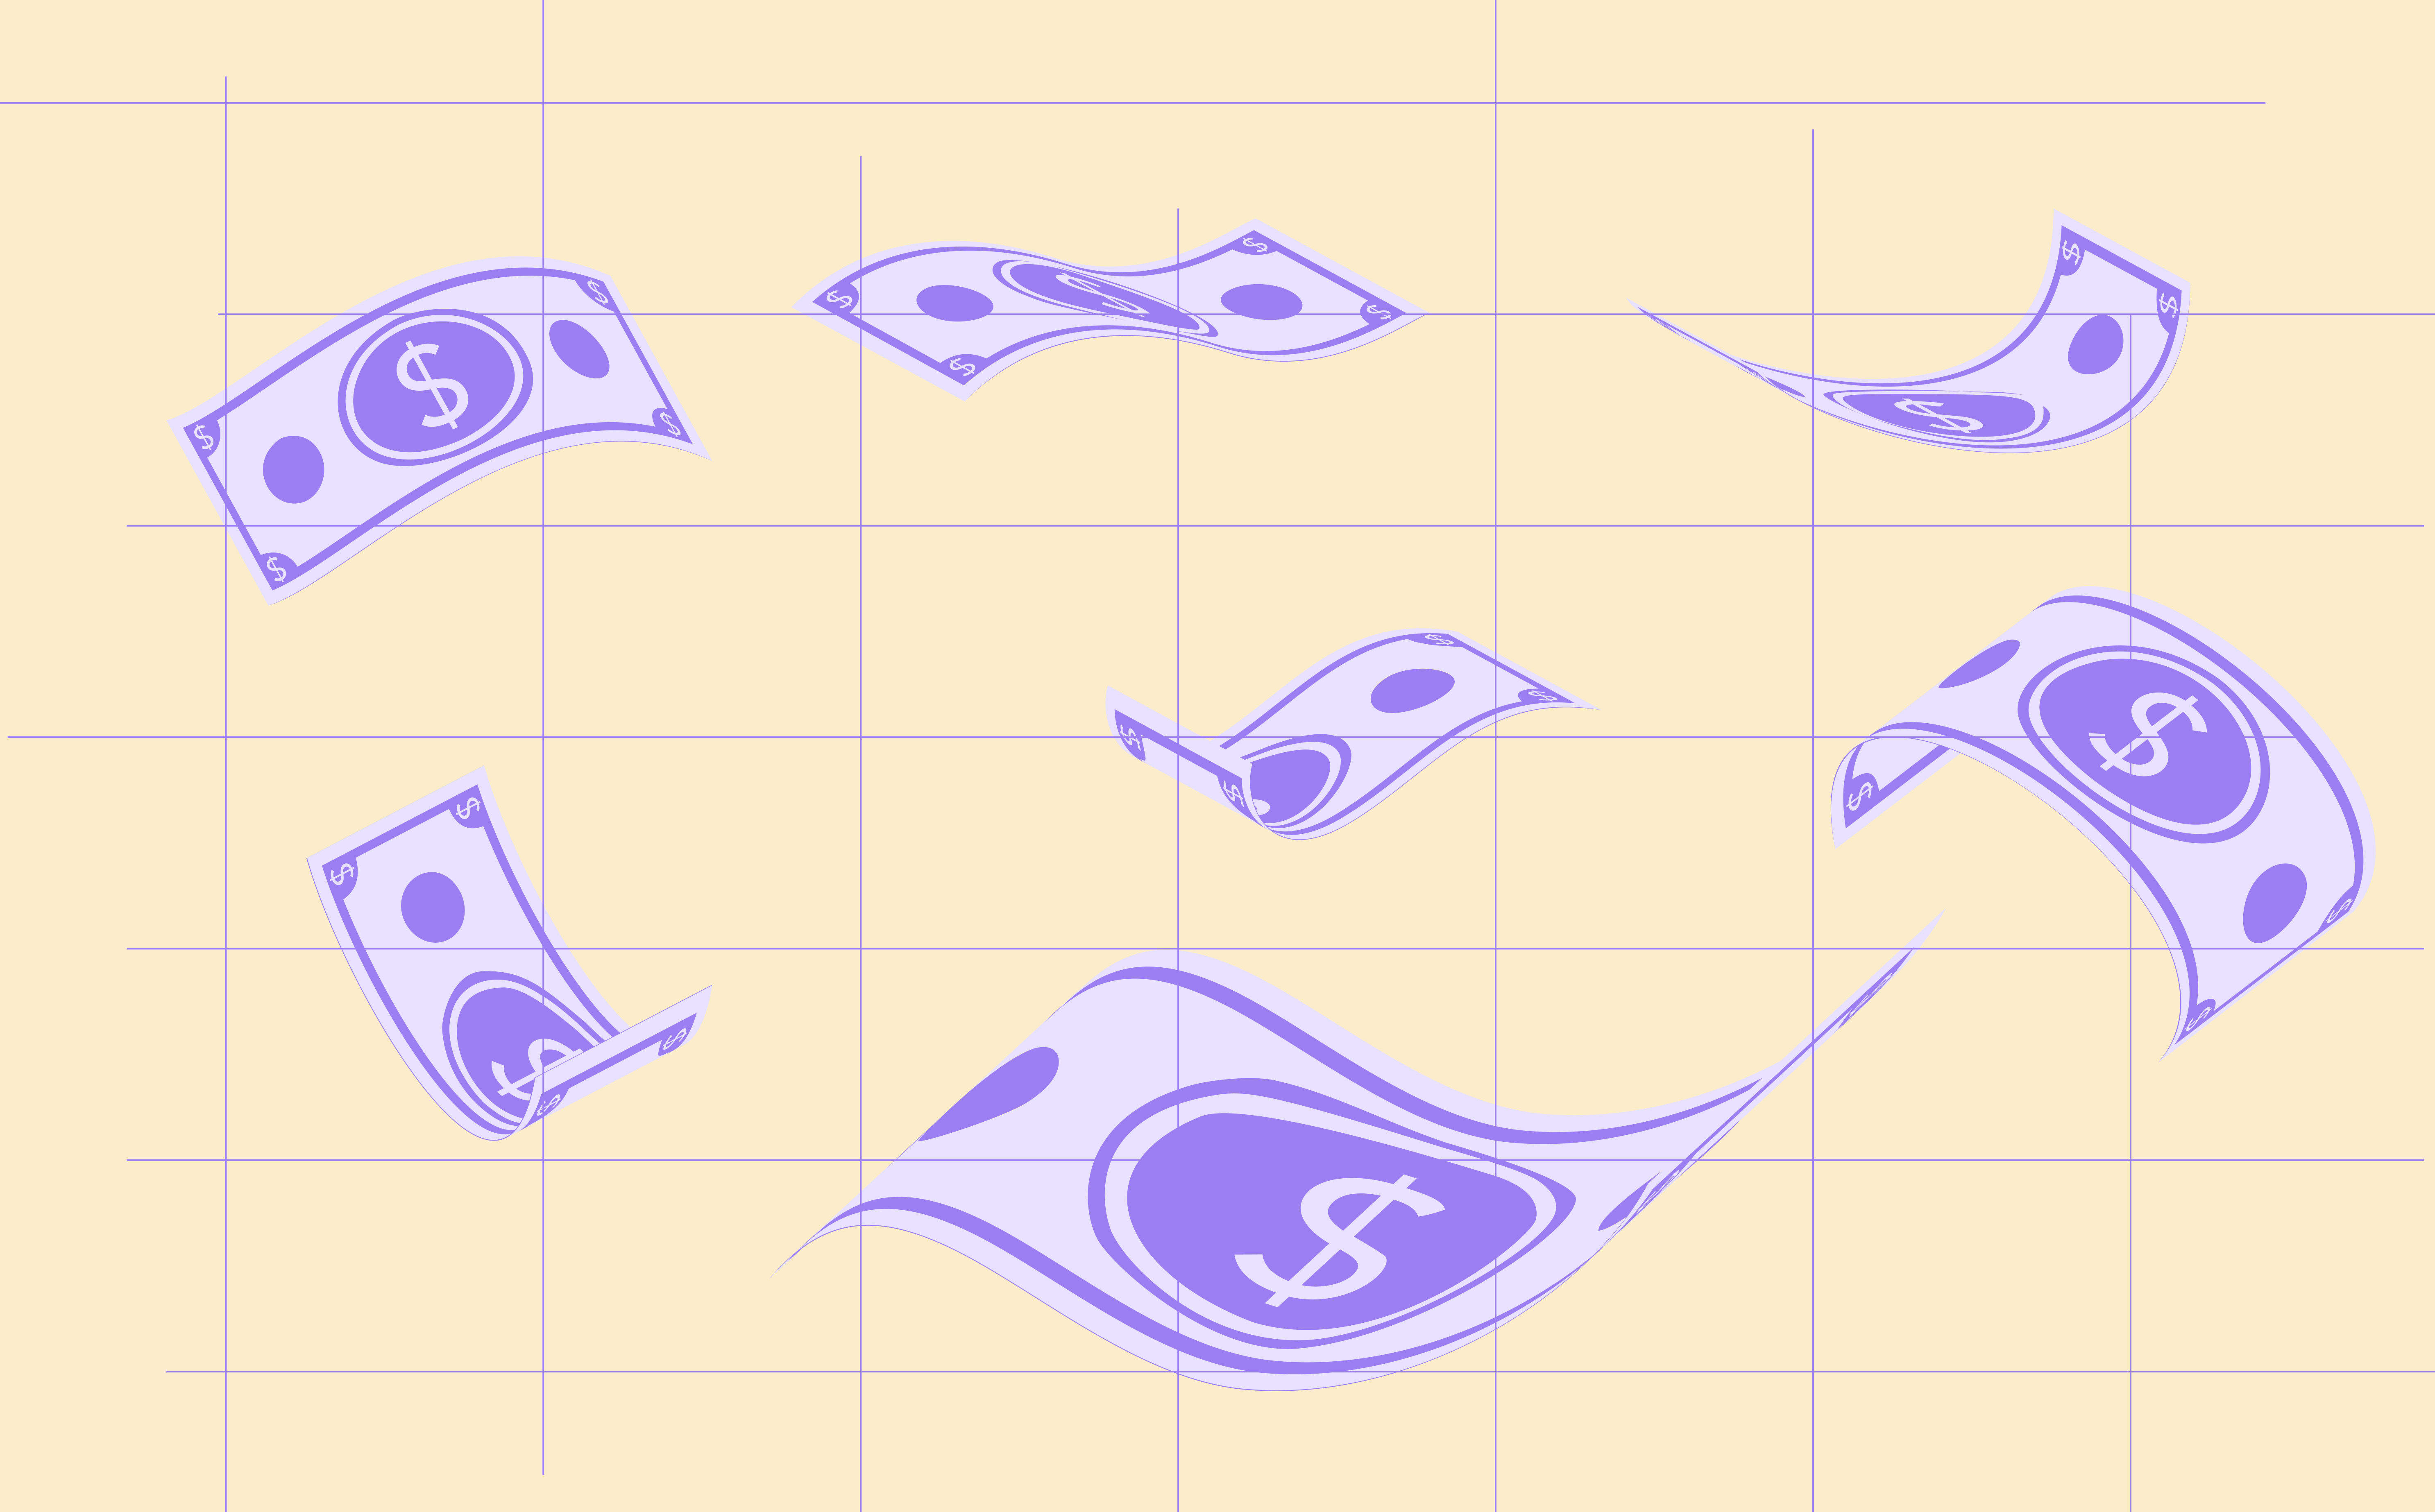 An image of purple money falling against a yellow background with a grid